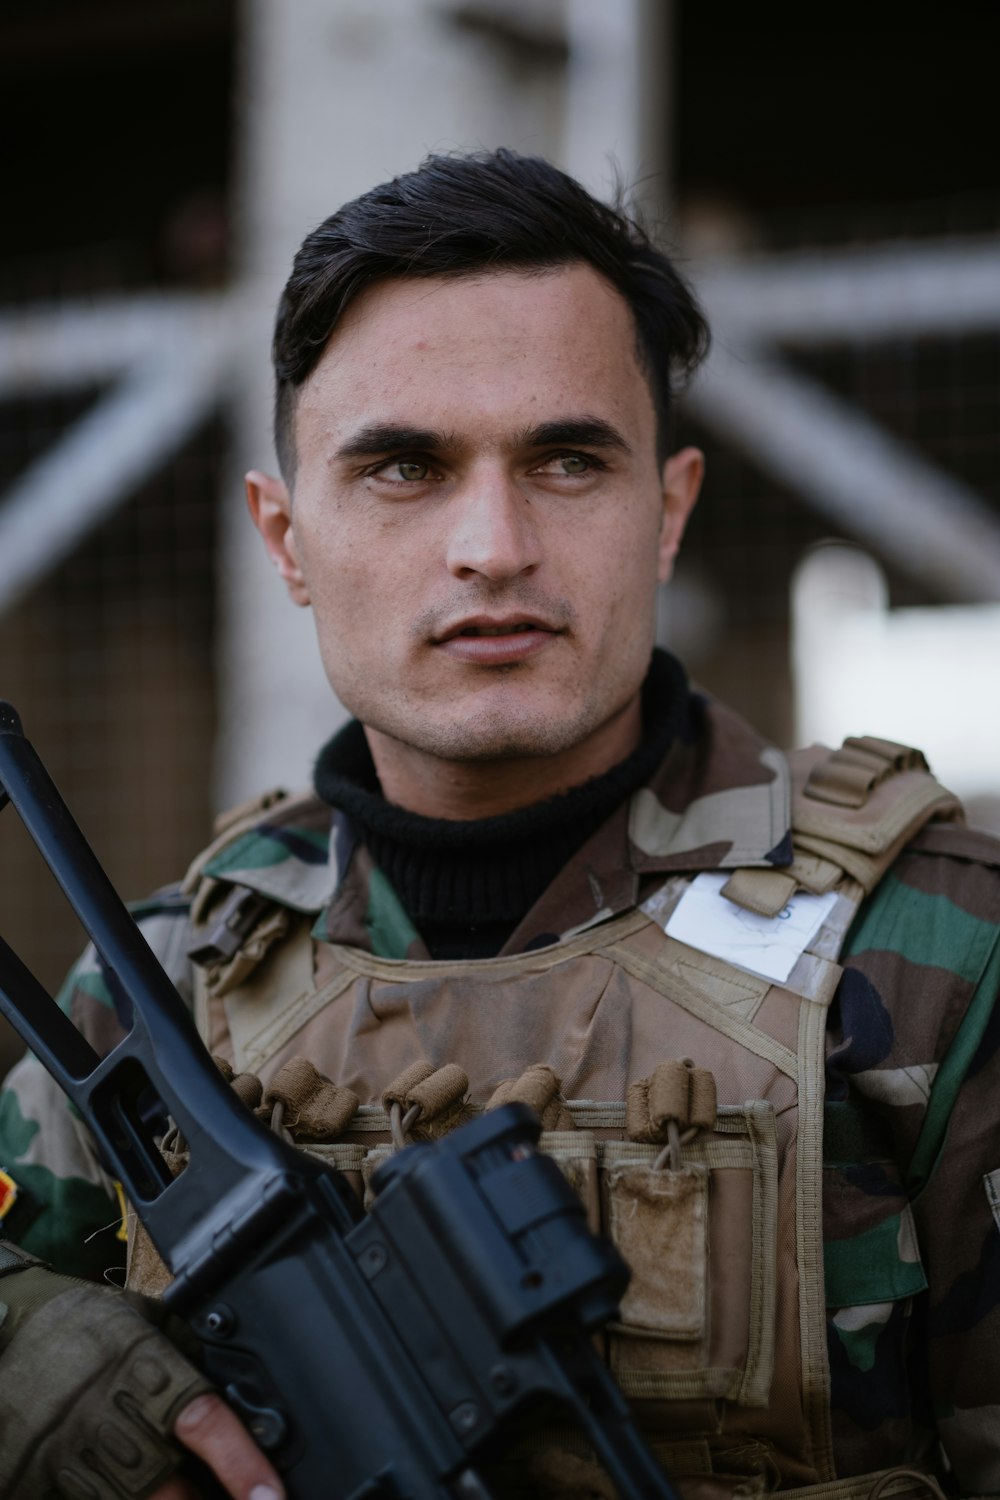 man in green and brown camouflage uniform holding black rifle